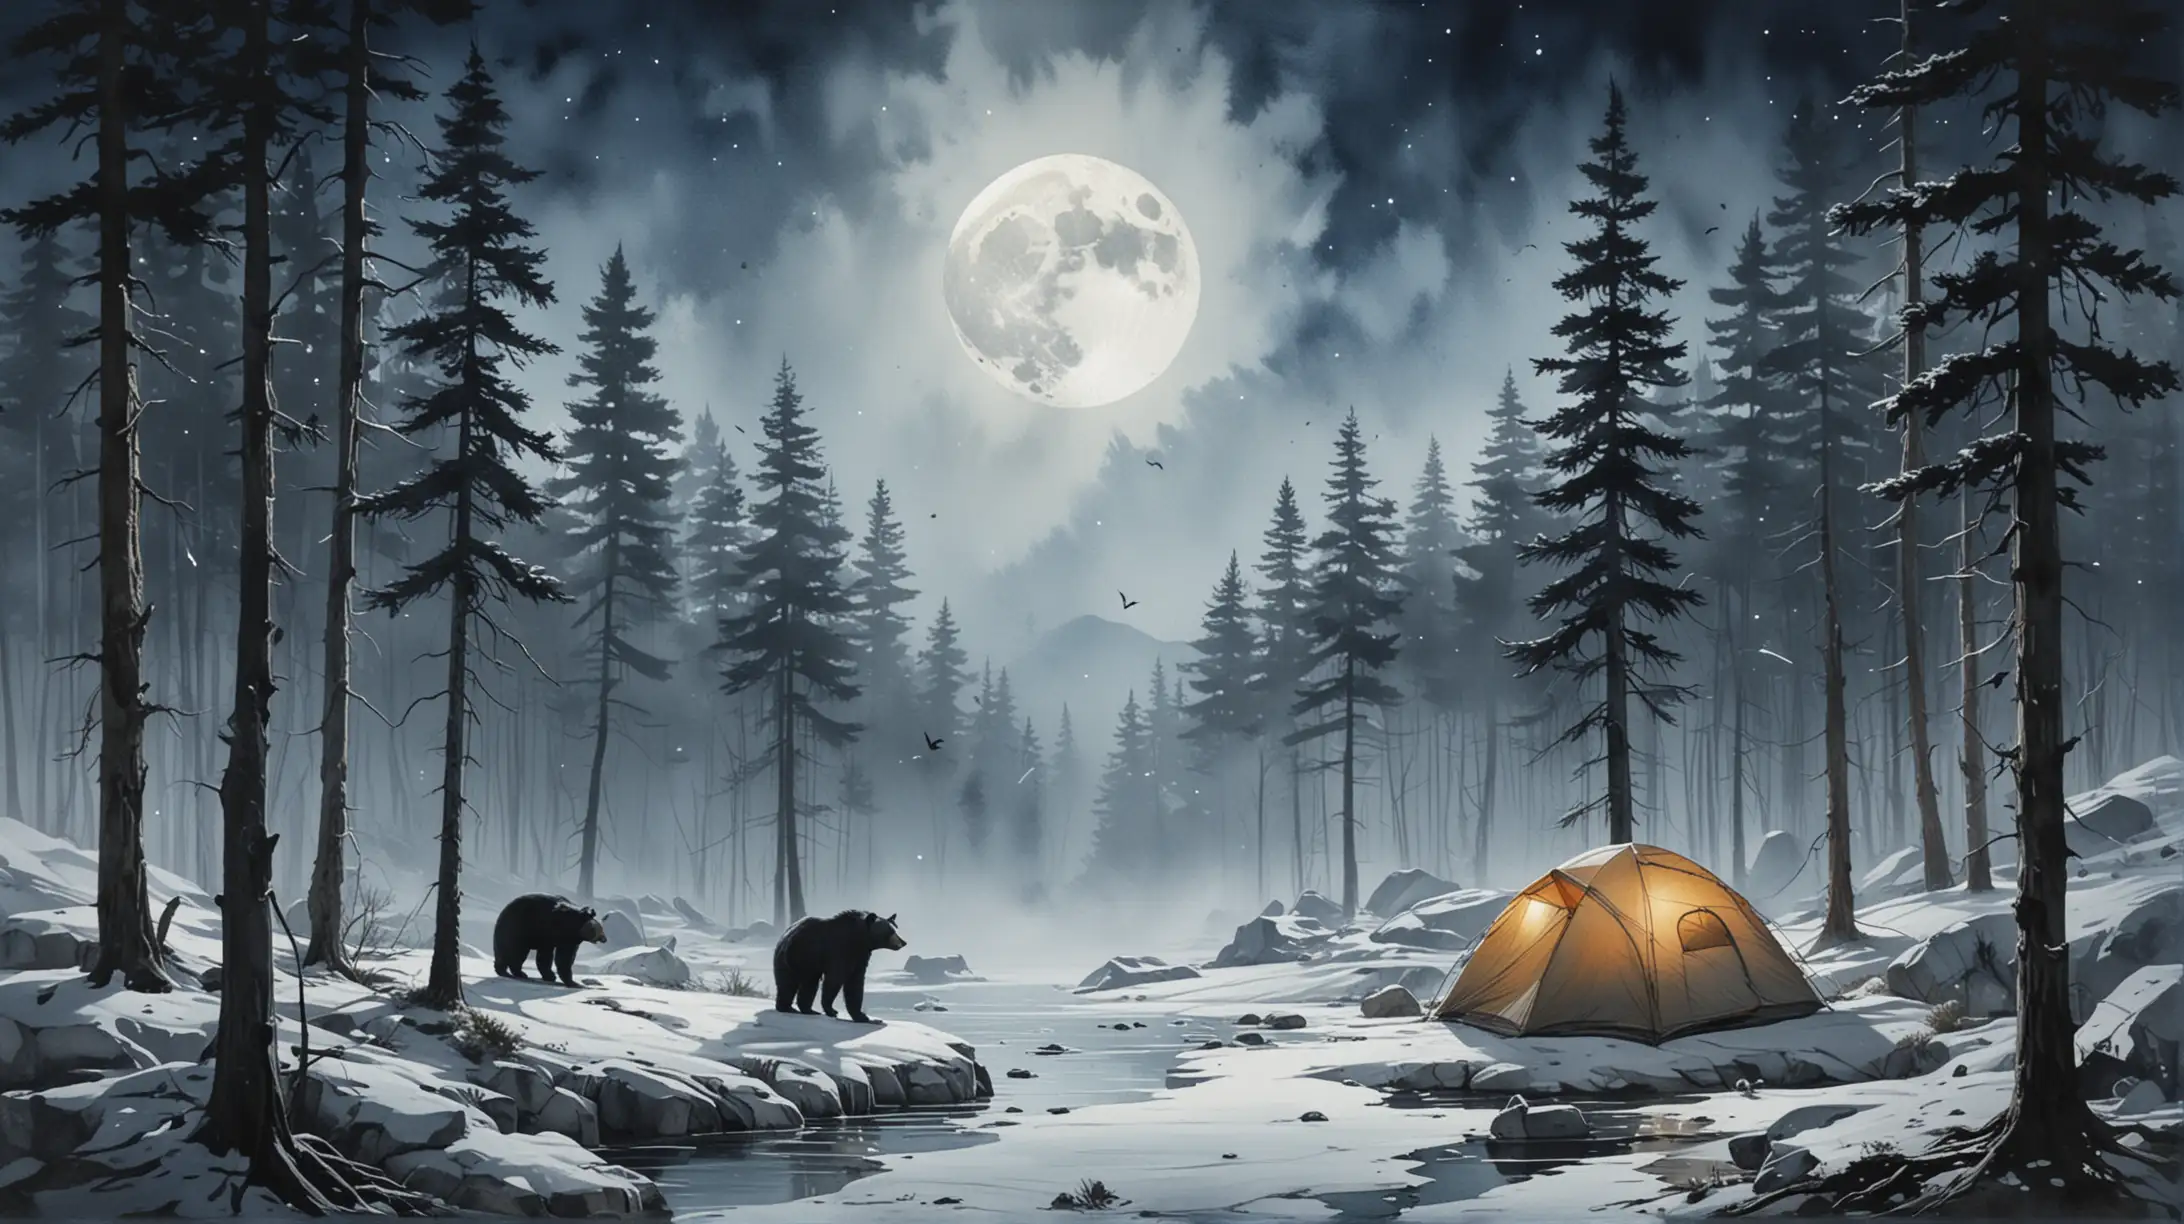 Surreal Moonlit Landscape with Floating Tent and Bear